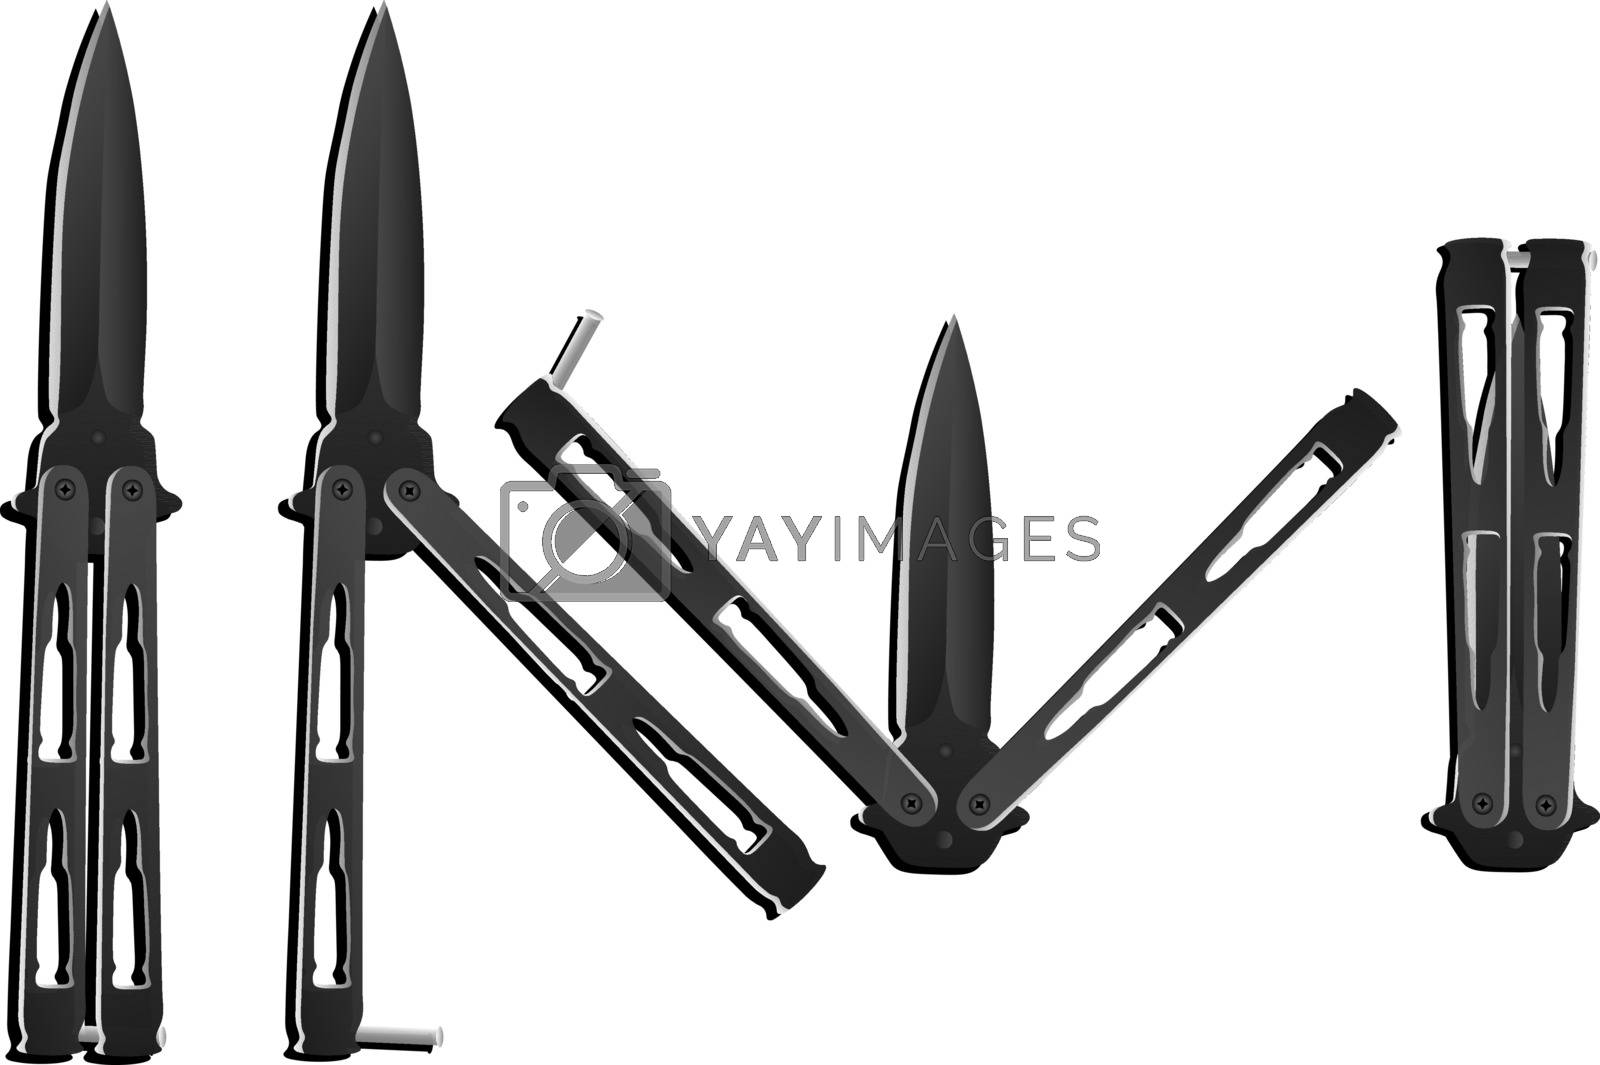 Royalty free image of Realistic black balisong or butterfly knife in four different positions by paranoido